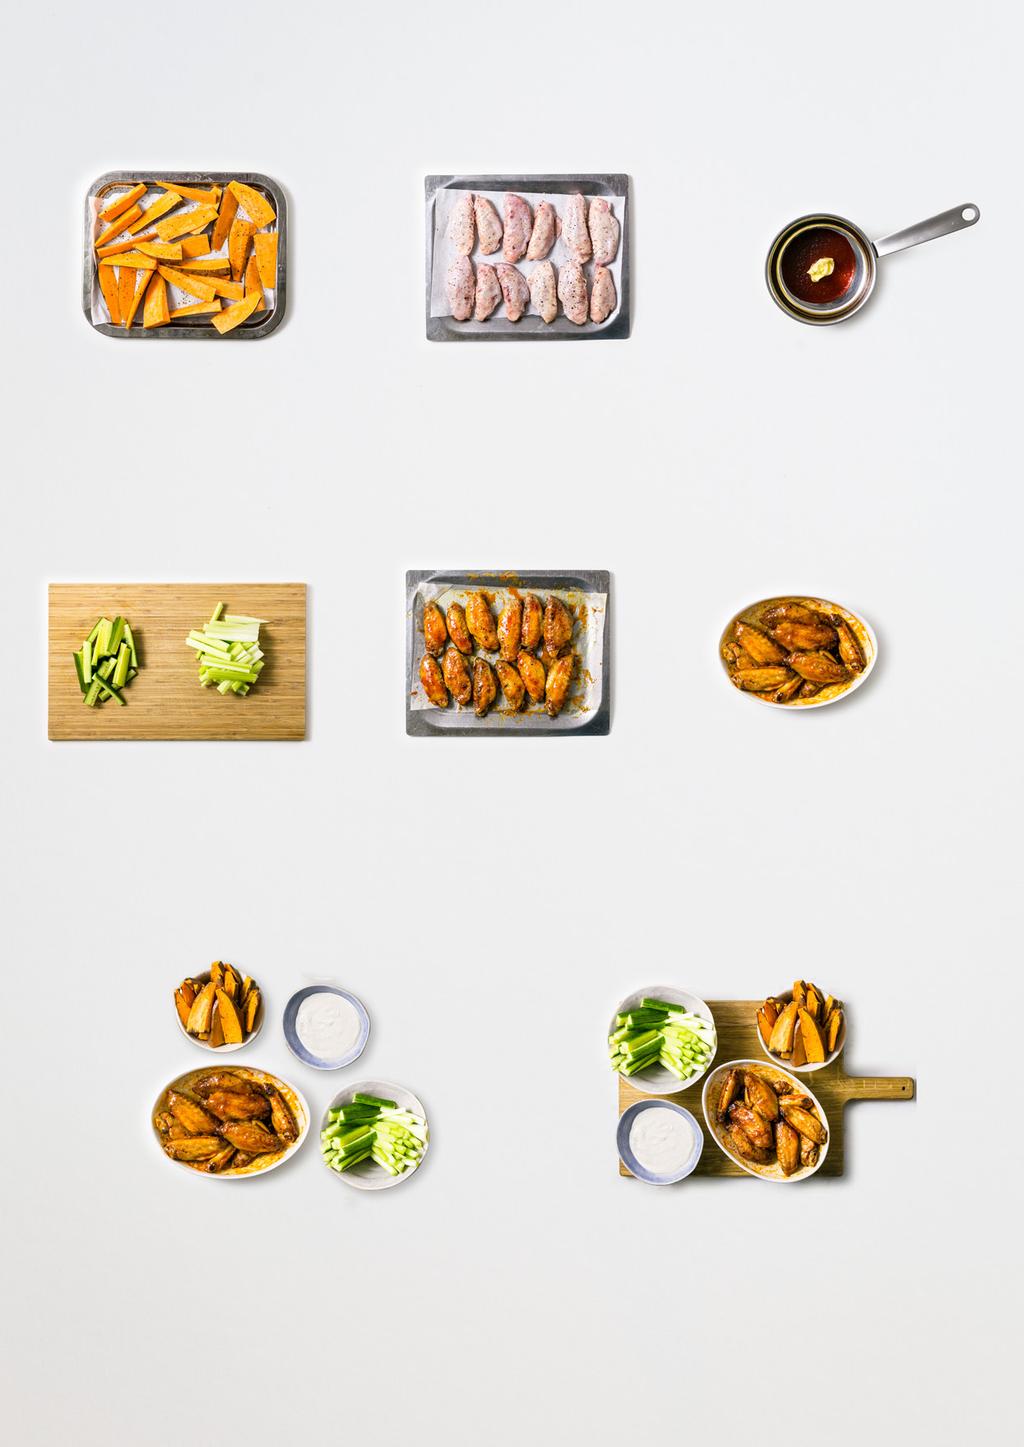 Buffalo-style chicken wings * Hot chili sauce, baked sweet potato and blue cheese dressing Be sure to check Kokkelørens clever tips and tricks on the back before you get started 1 - Find a cutting